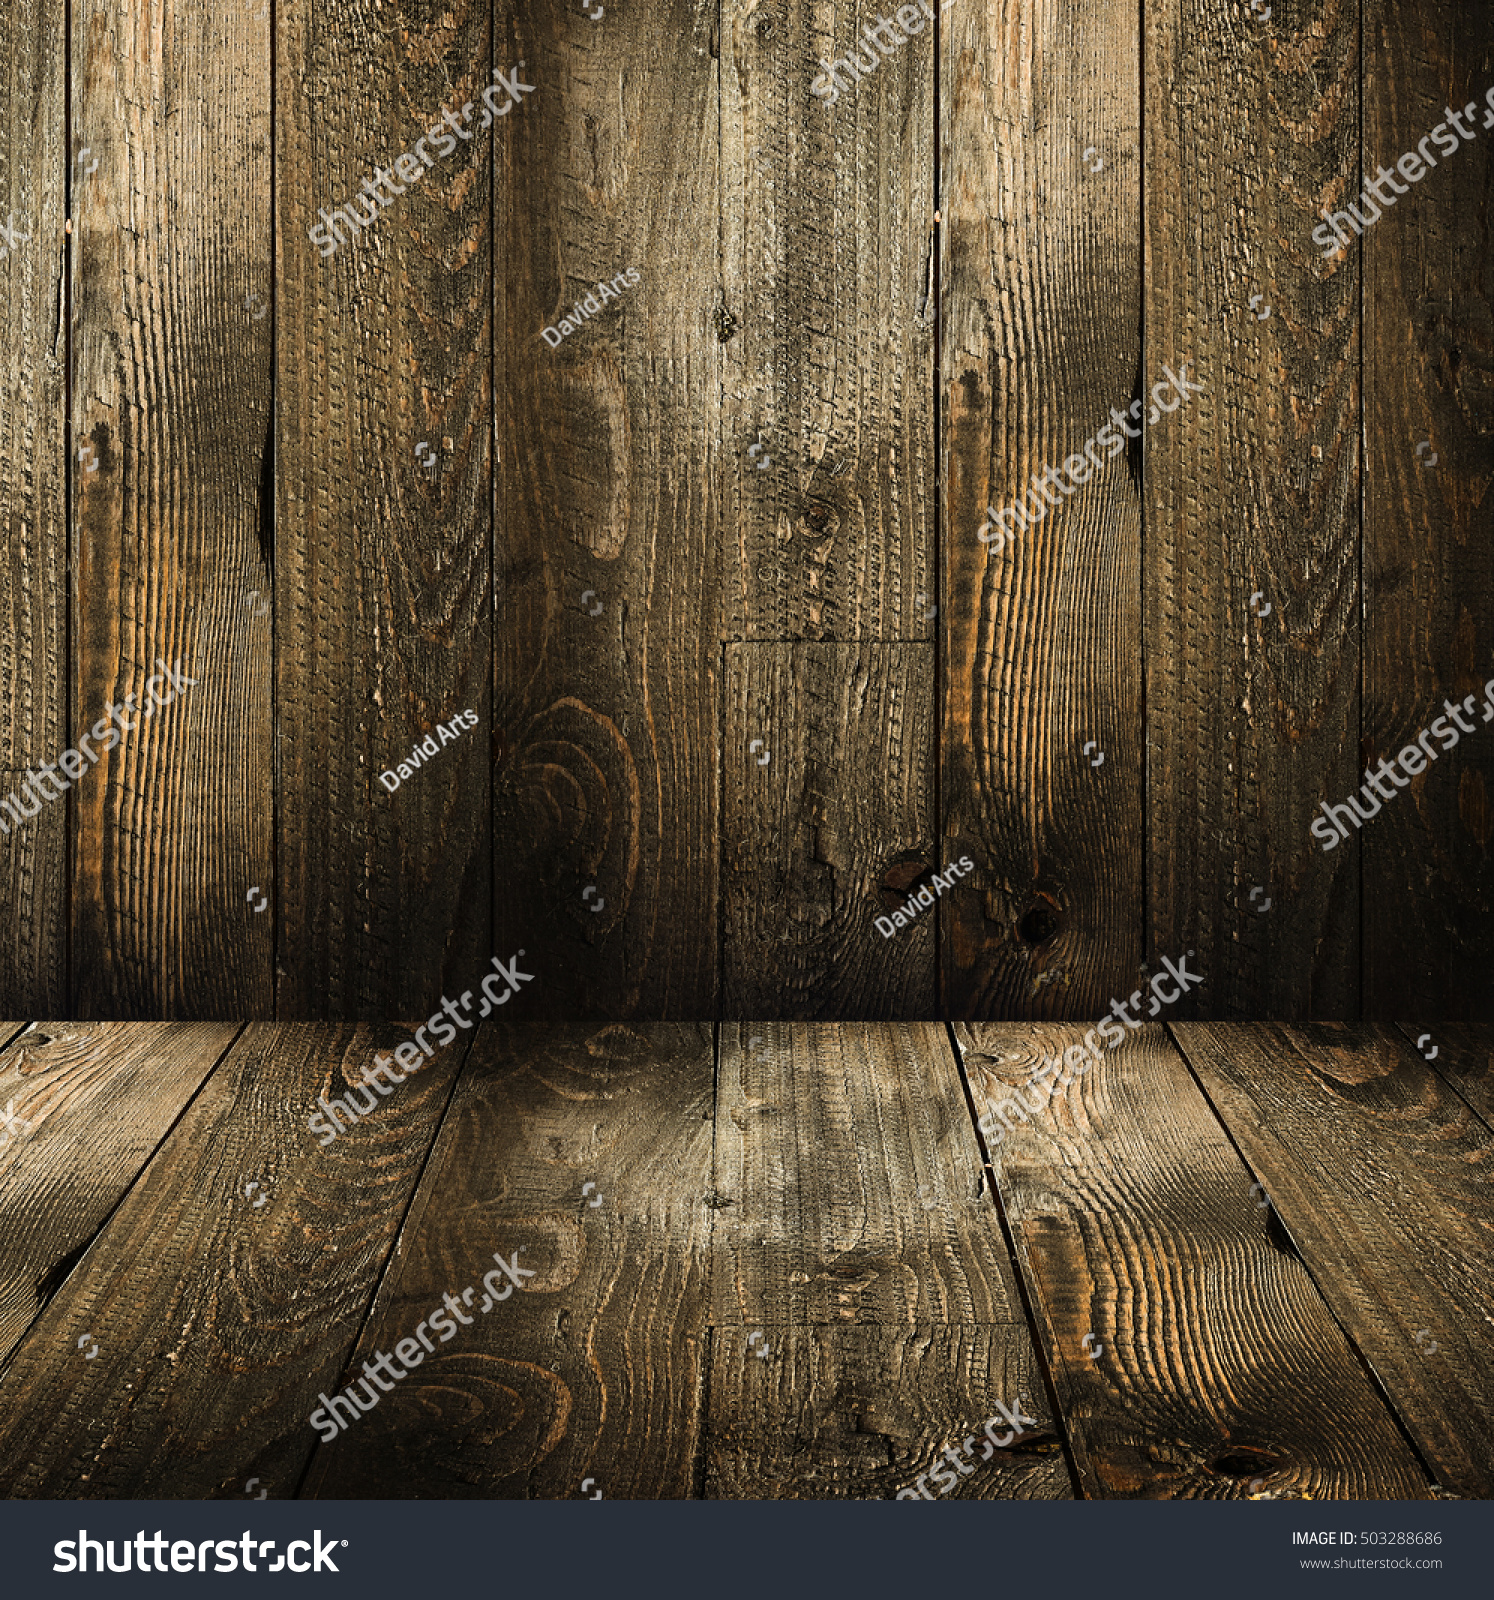 Natural Dark Wooden background. Old dirty wood tables or parquet with knots and holes and aged partculars. #503288686